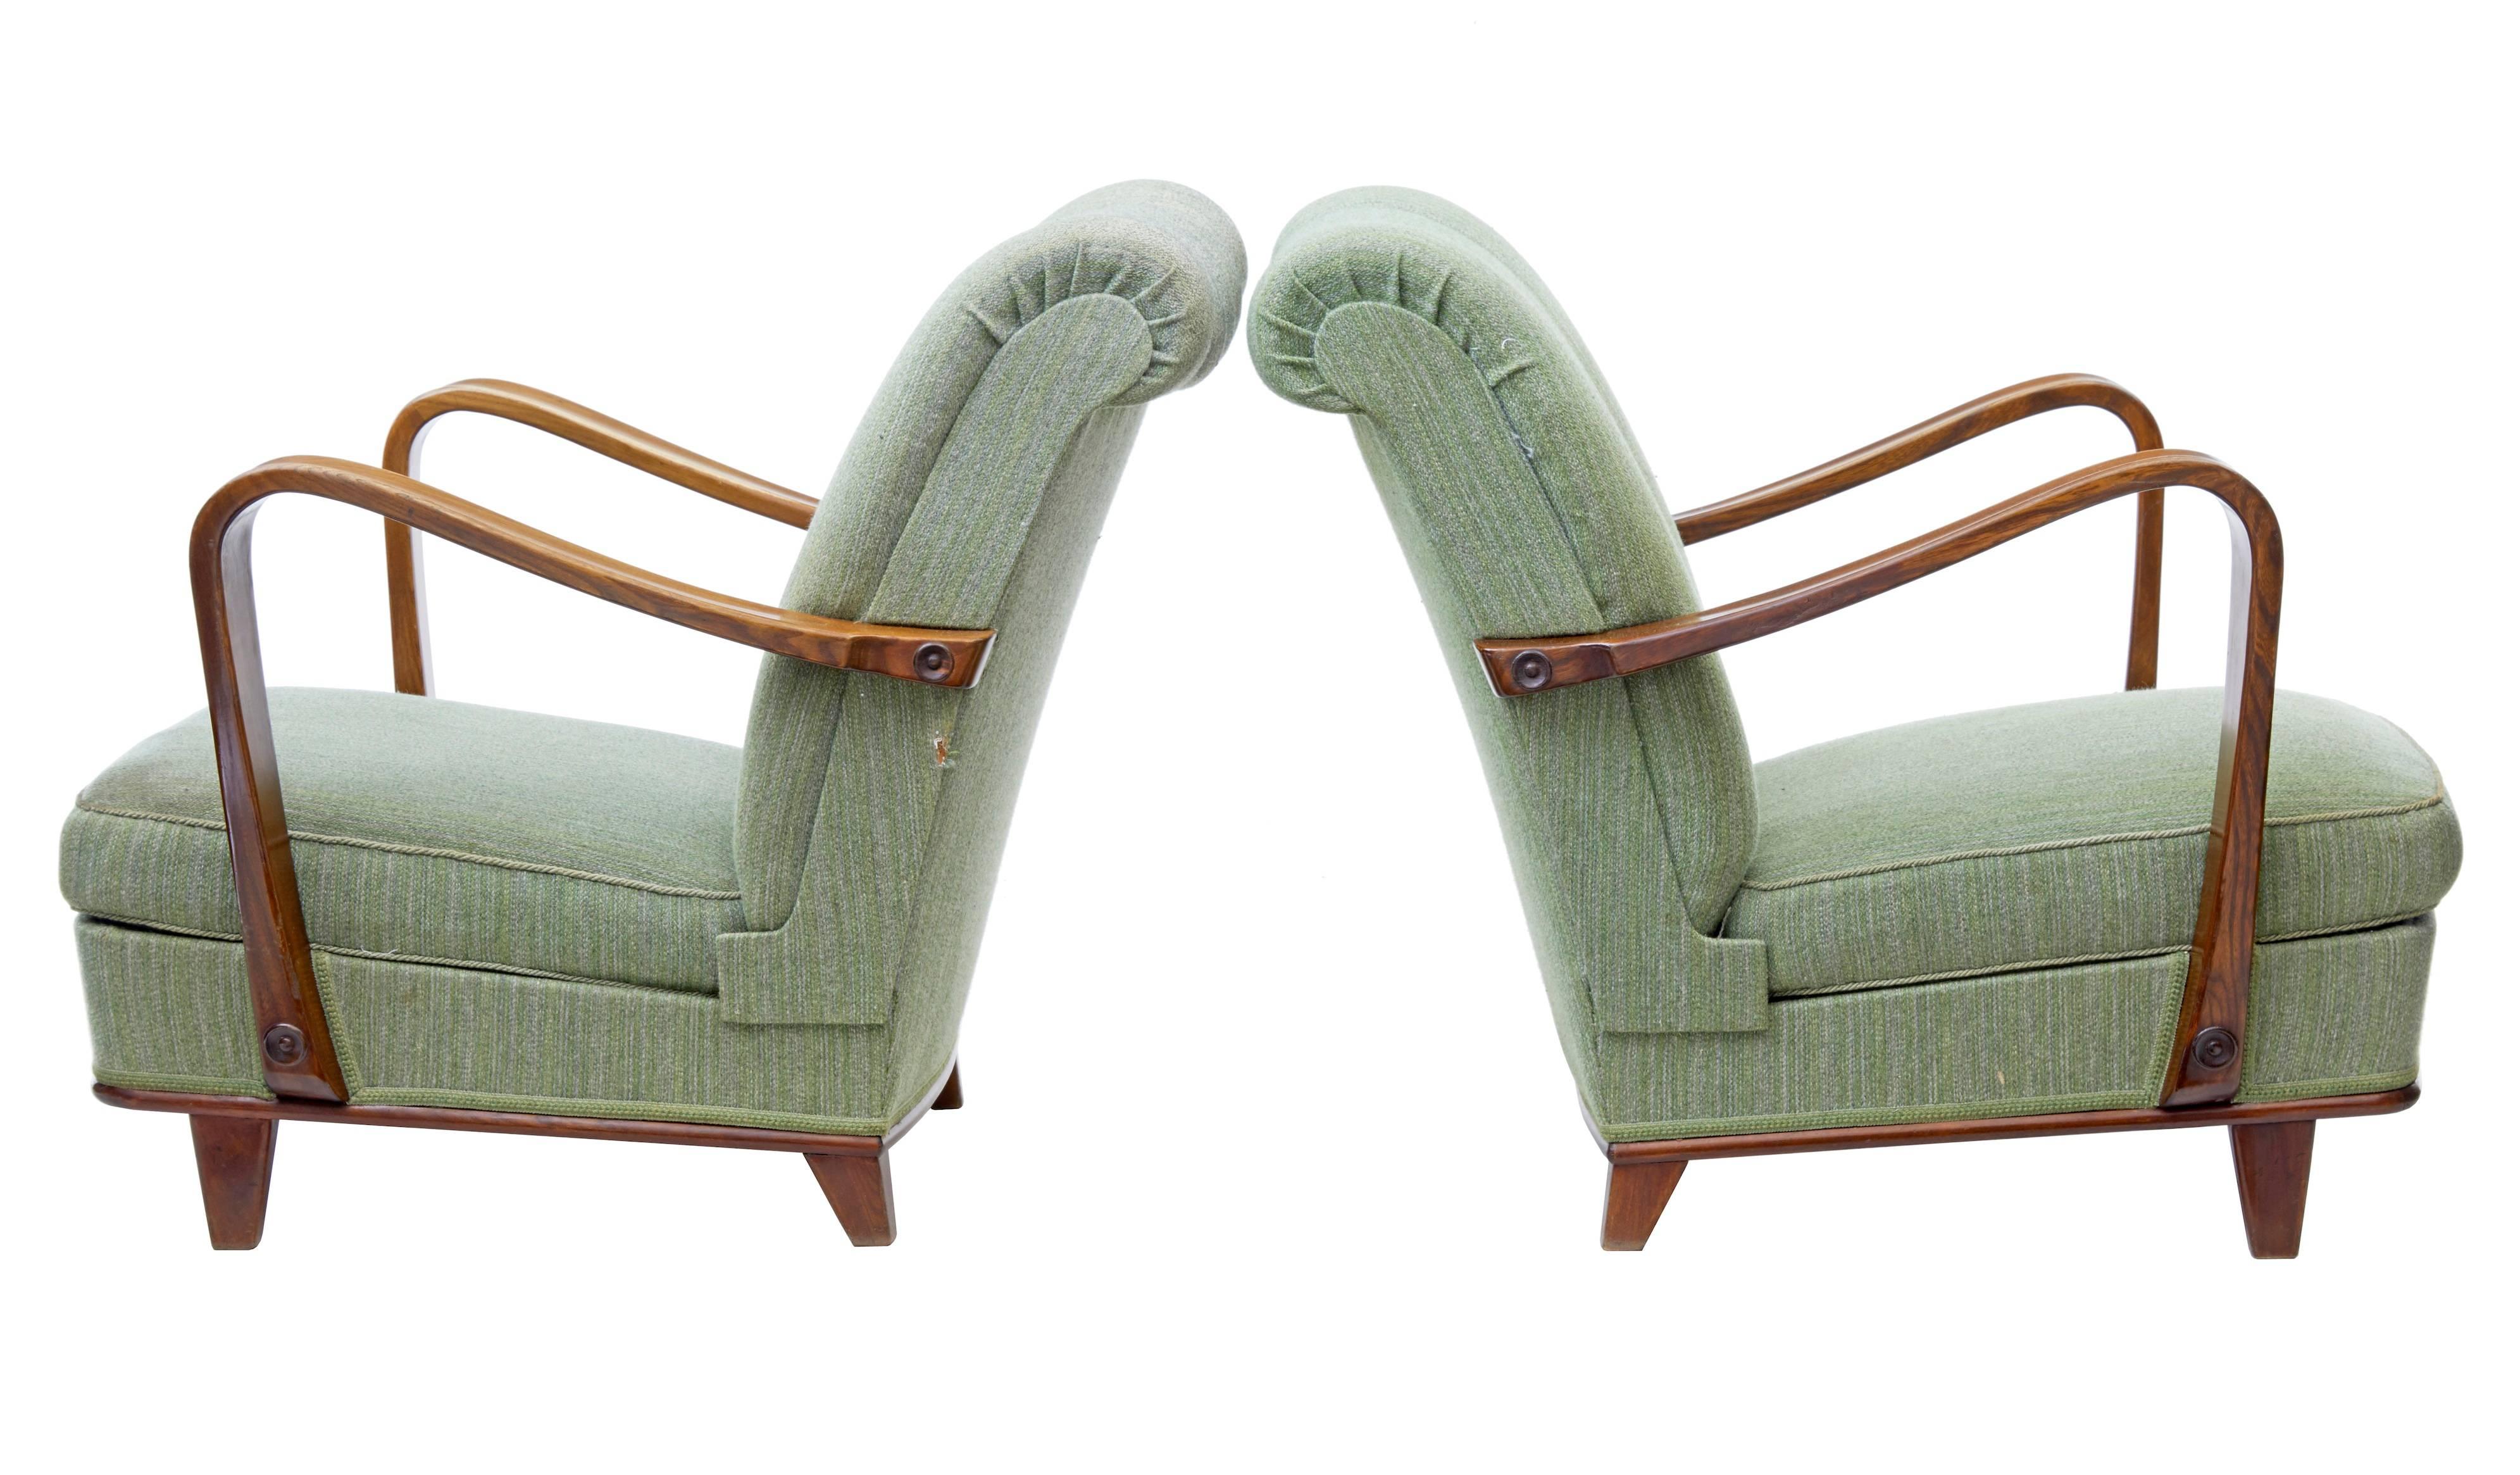 Fine pair of early 1960s shell back armchairs.
Low reclining seating position. Swooping birch arms provide the shape for the open side profile.
One hole to side of fabric and benefitting a clean. Otherwise perfectly useable.

Measures: Height 30